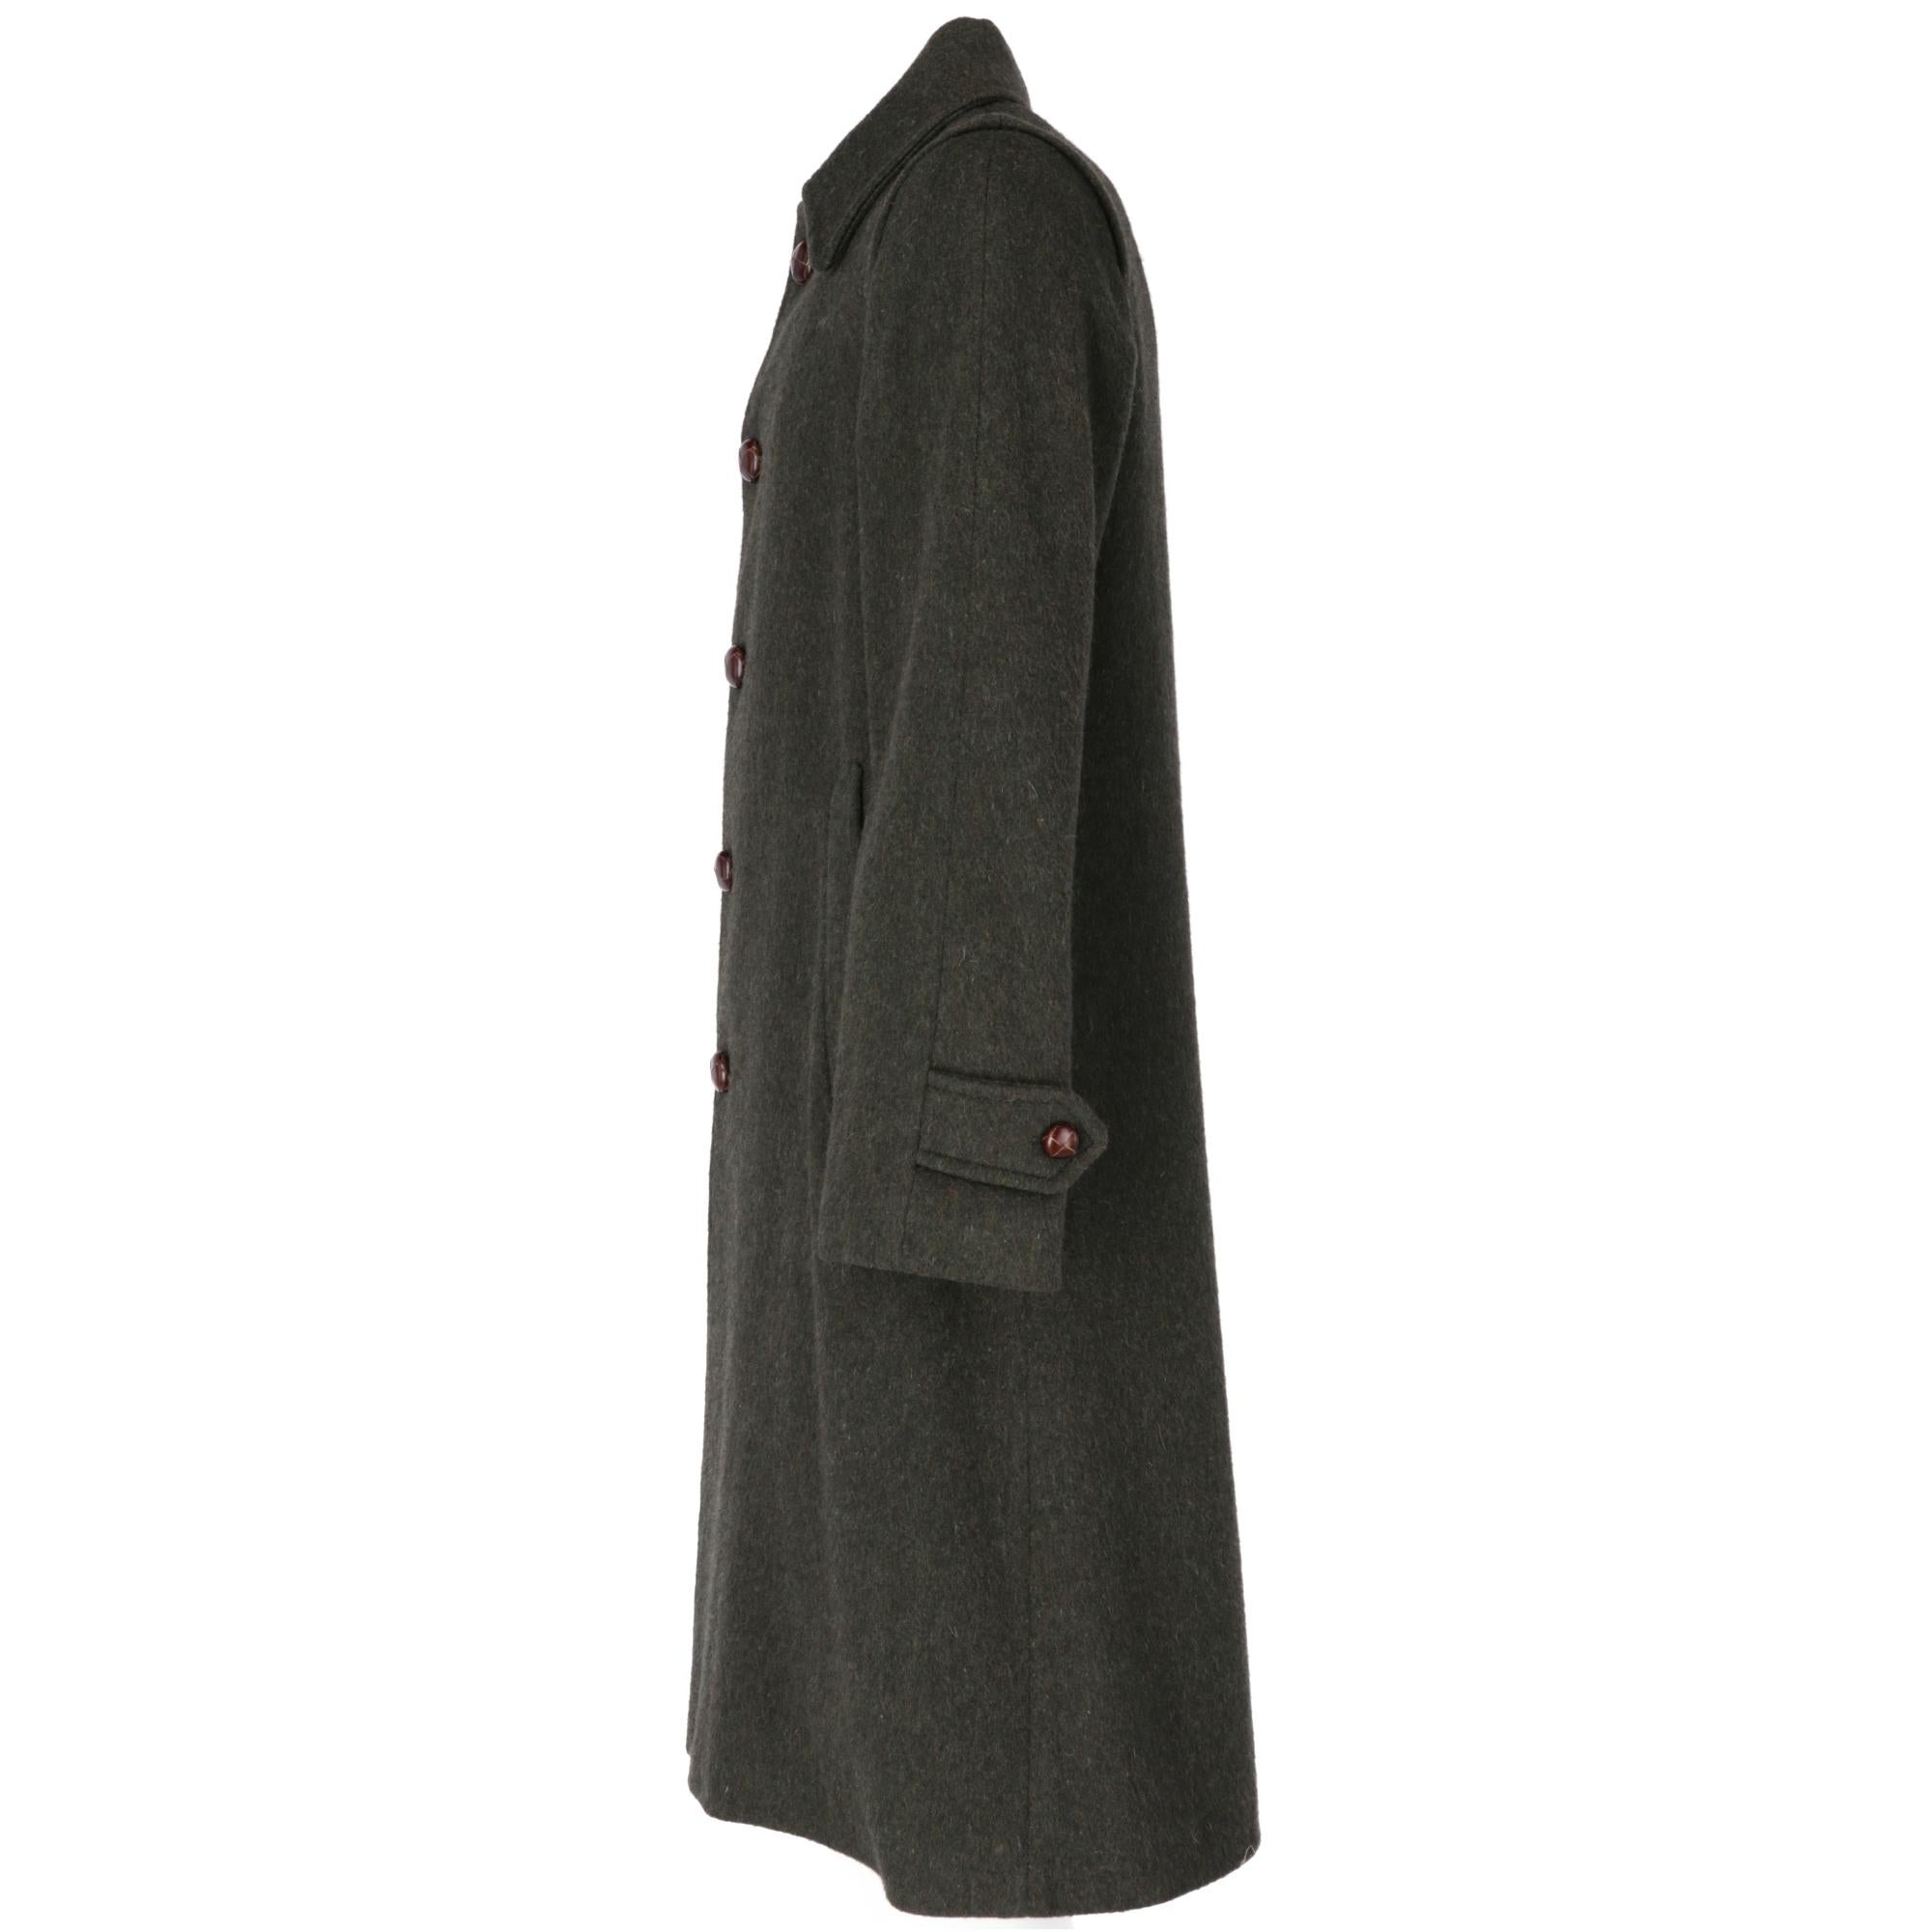 Loden Helly Sport dark green wool coat with two front welt pockets, inverted pleat on back, classic collar, front closure with covered leather buttons.

The item has two small holes in the lining as shown in the pictures.

The 